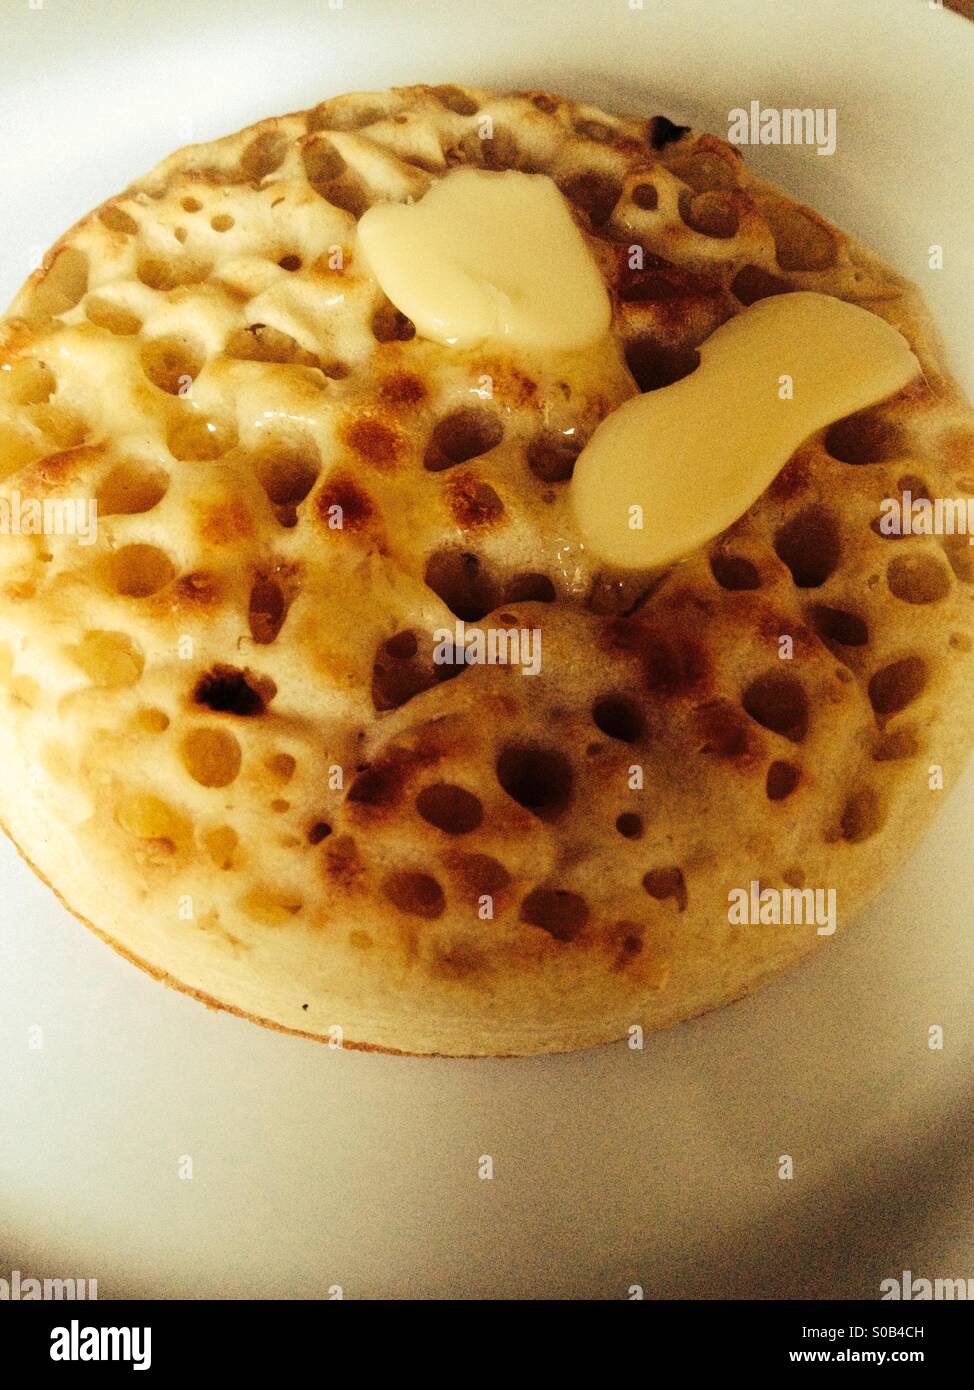 Crumpet Hot buttered on a white plate Banque D'Images